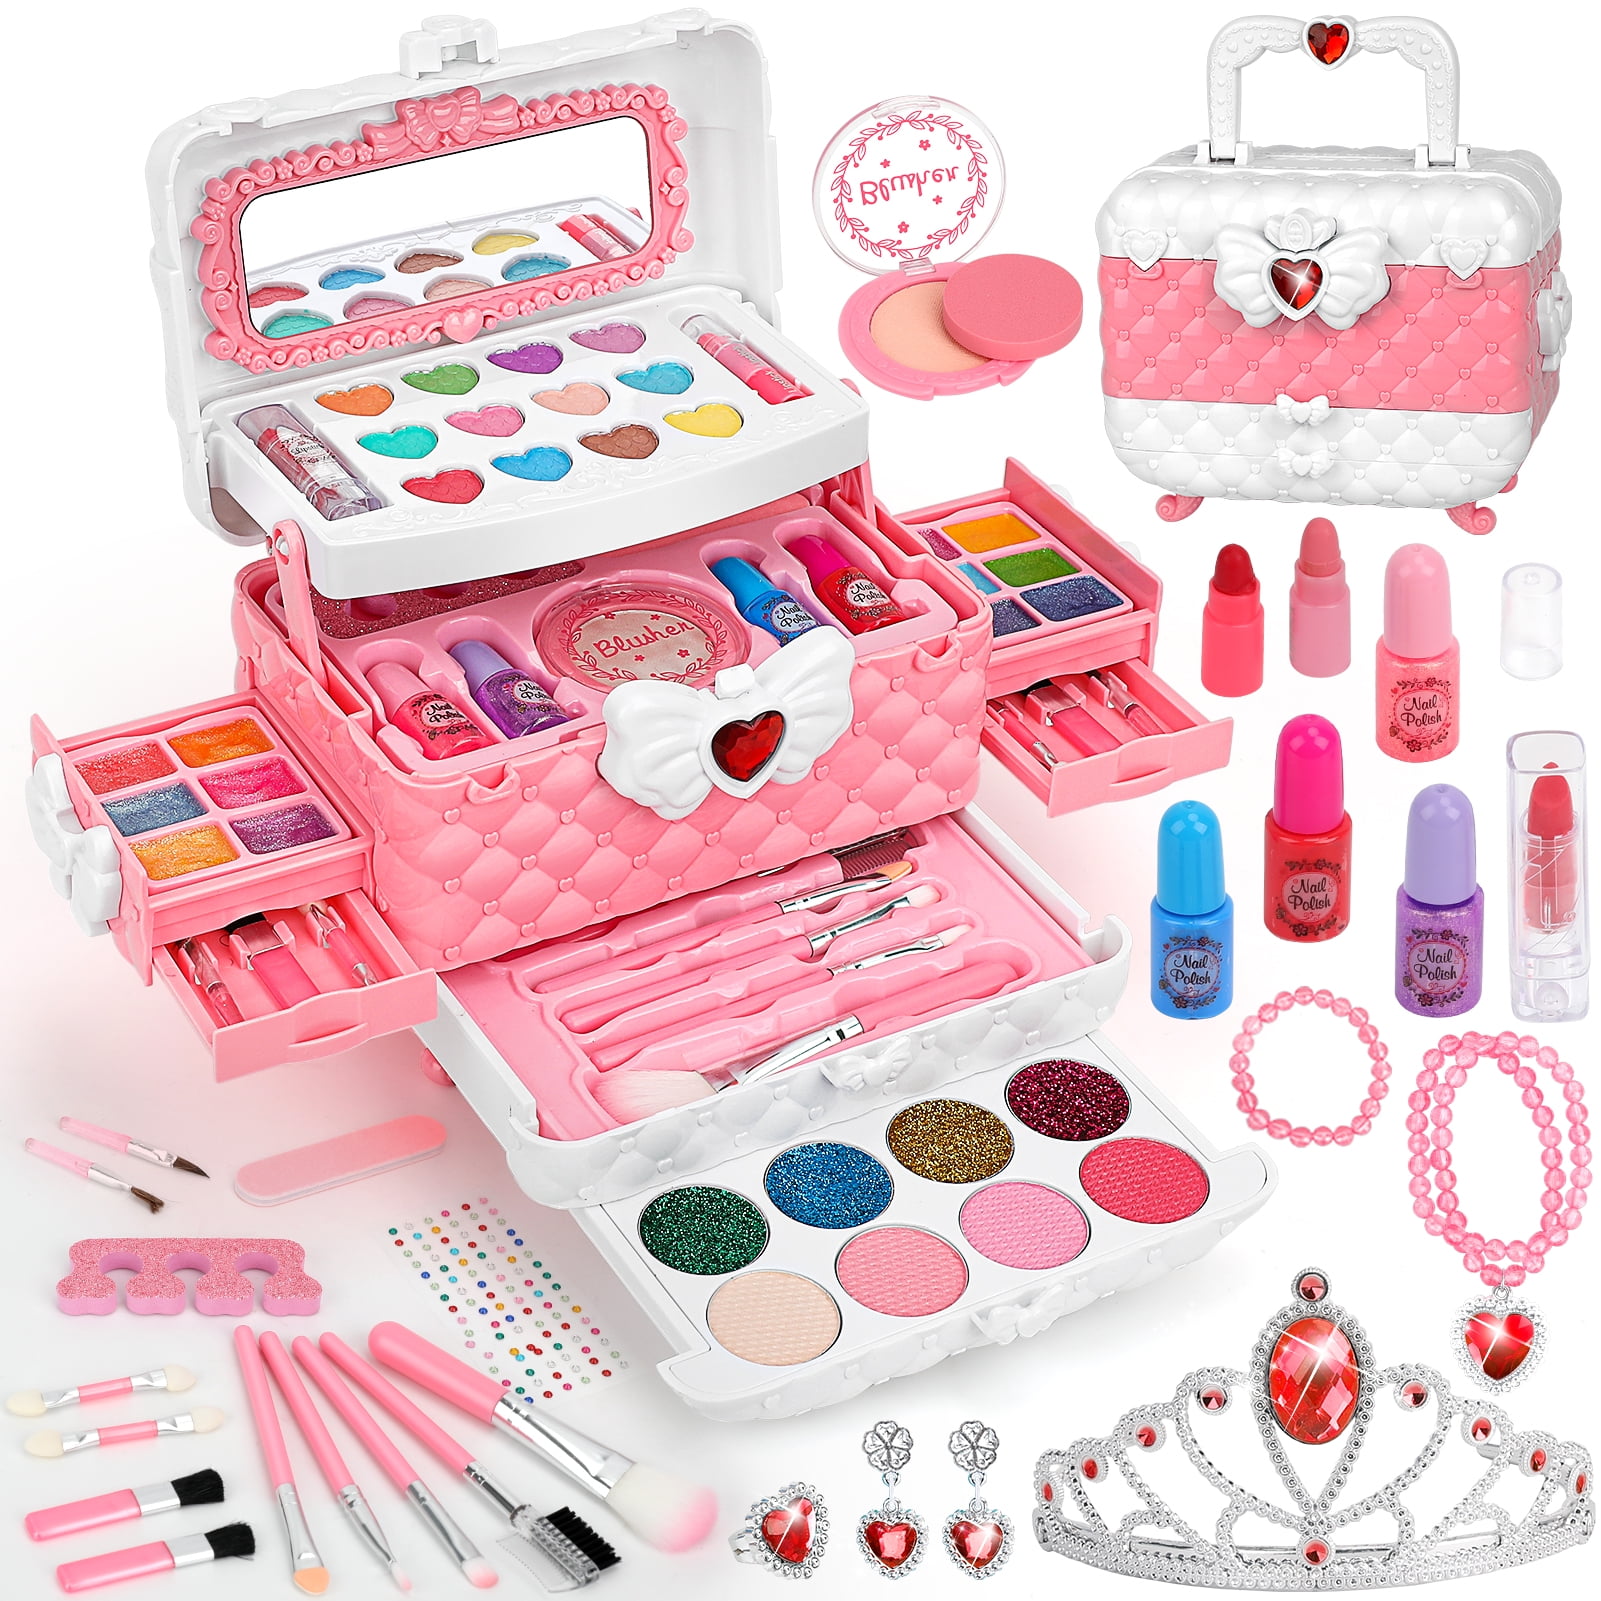 25pcs Kids Makeup Kit for Girl, Play Makeup for Little Girl ,Washable Makeup Toy Set,Real Cosmetic Beauty Set for Kids., Size: 25 Pcs, Blue